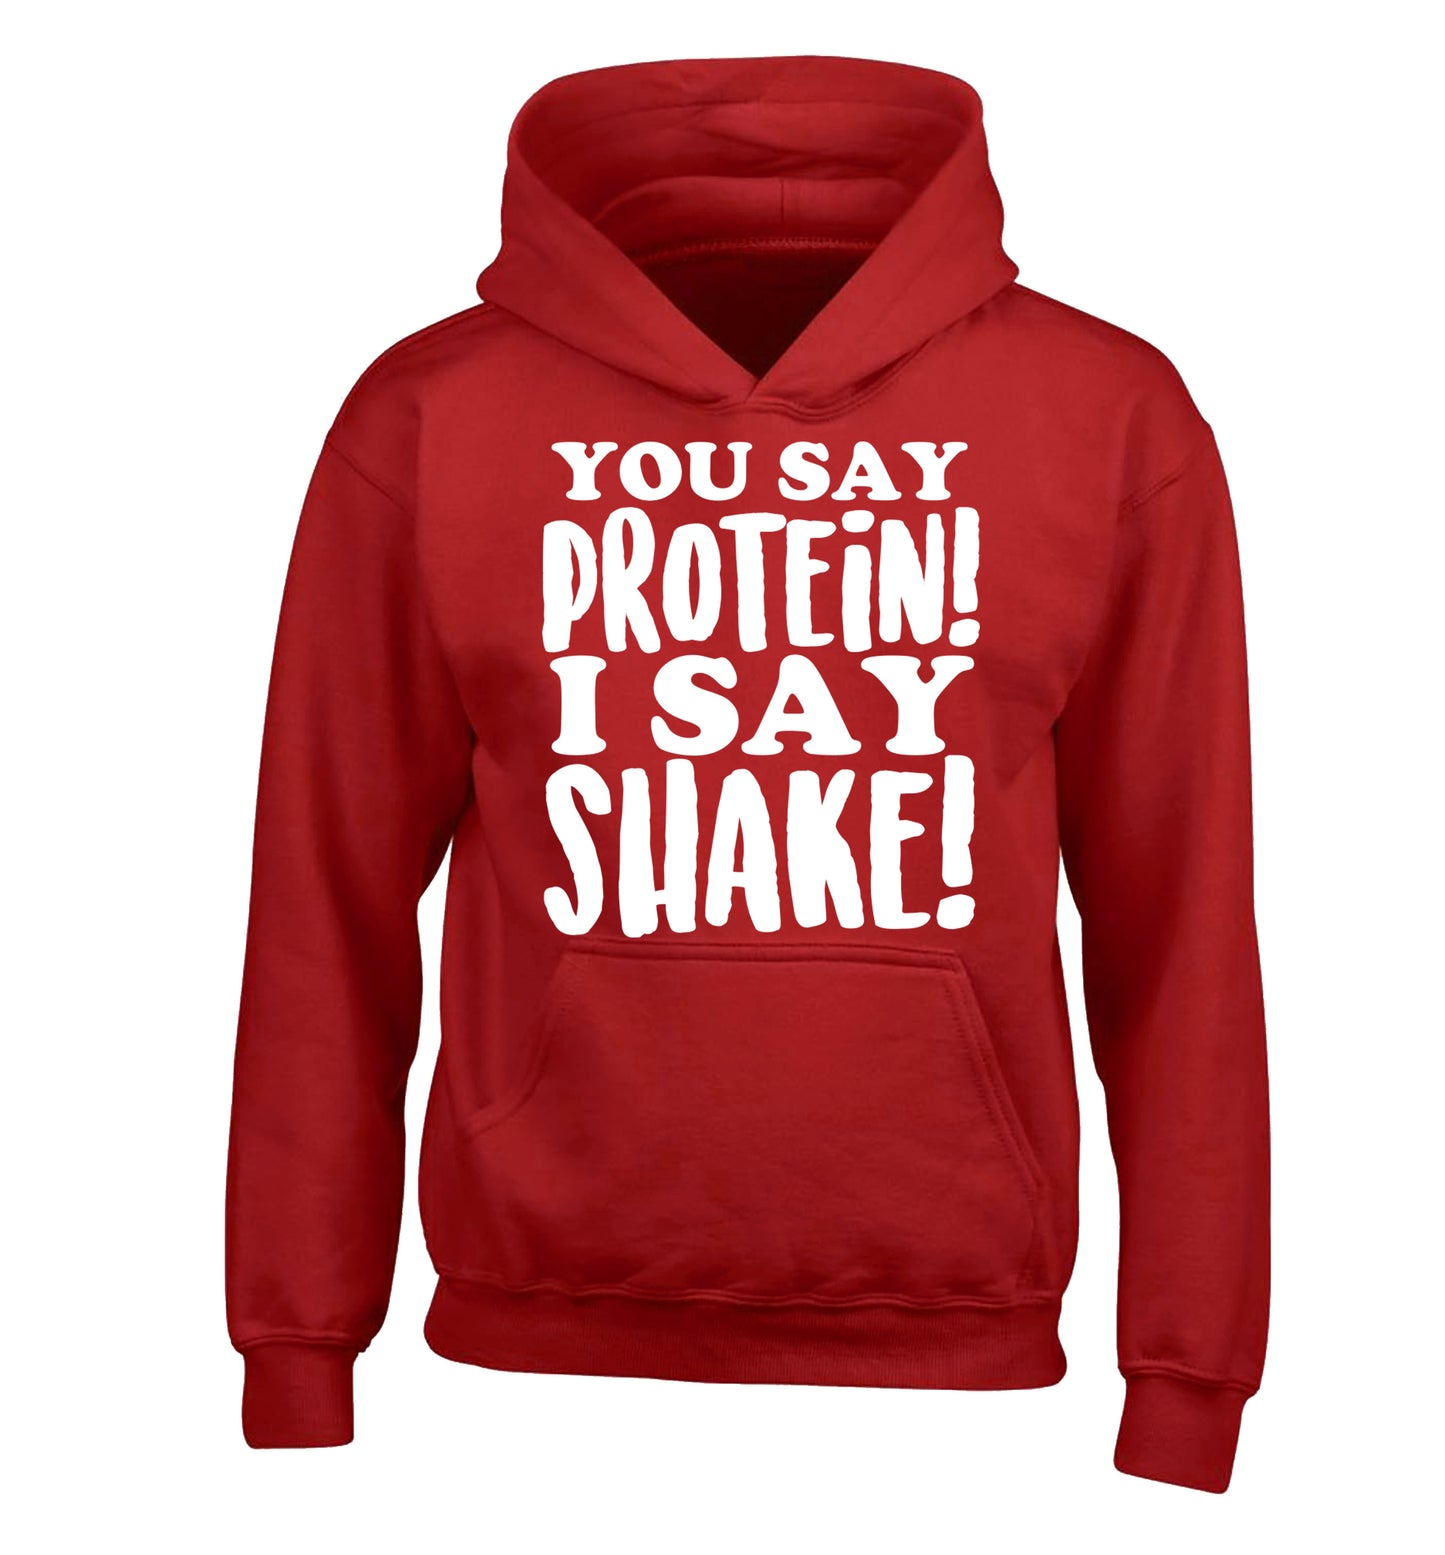 You say protein I say shake! children's red hoodie 12-14 Years